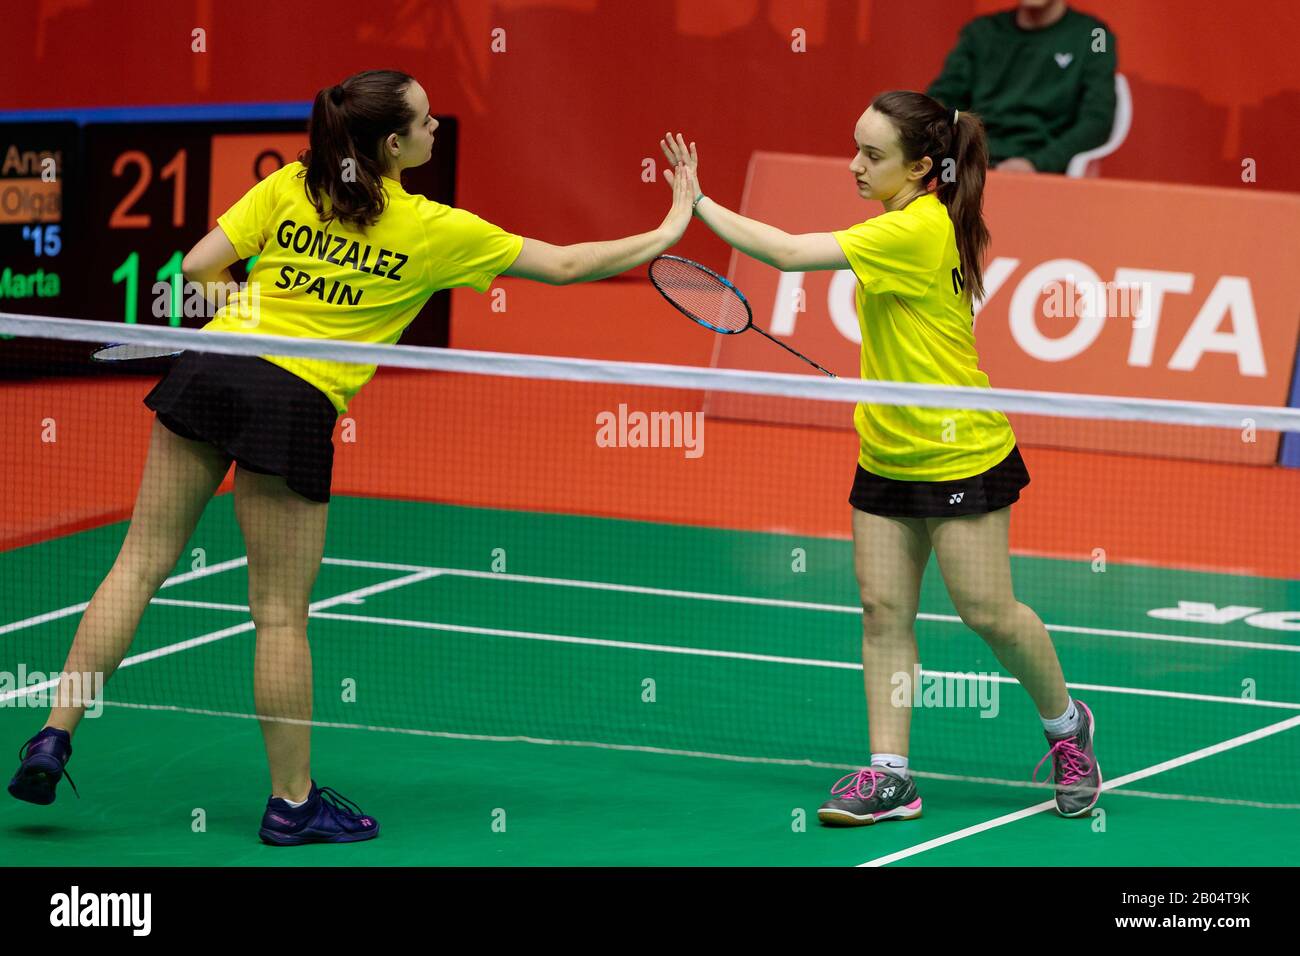 Barcelona, Spain. 18th Feb 2020. Barcelona Spain Master 2020 - Day 1; Marta  Gonzalez and Paula Molins of Spain competes in the Women's team double  qualification Round 1 match against Anastasia Akchurina